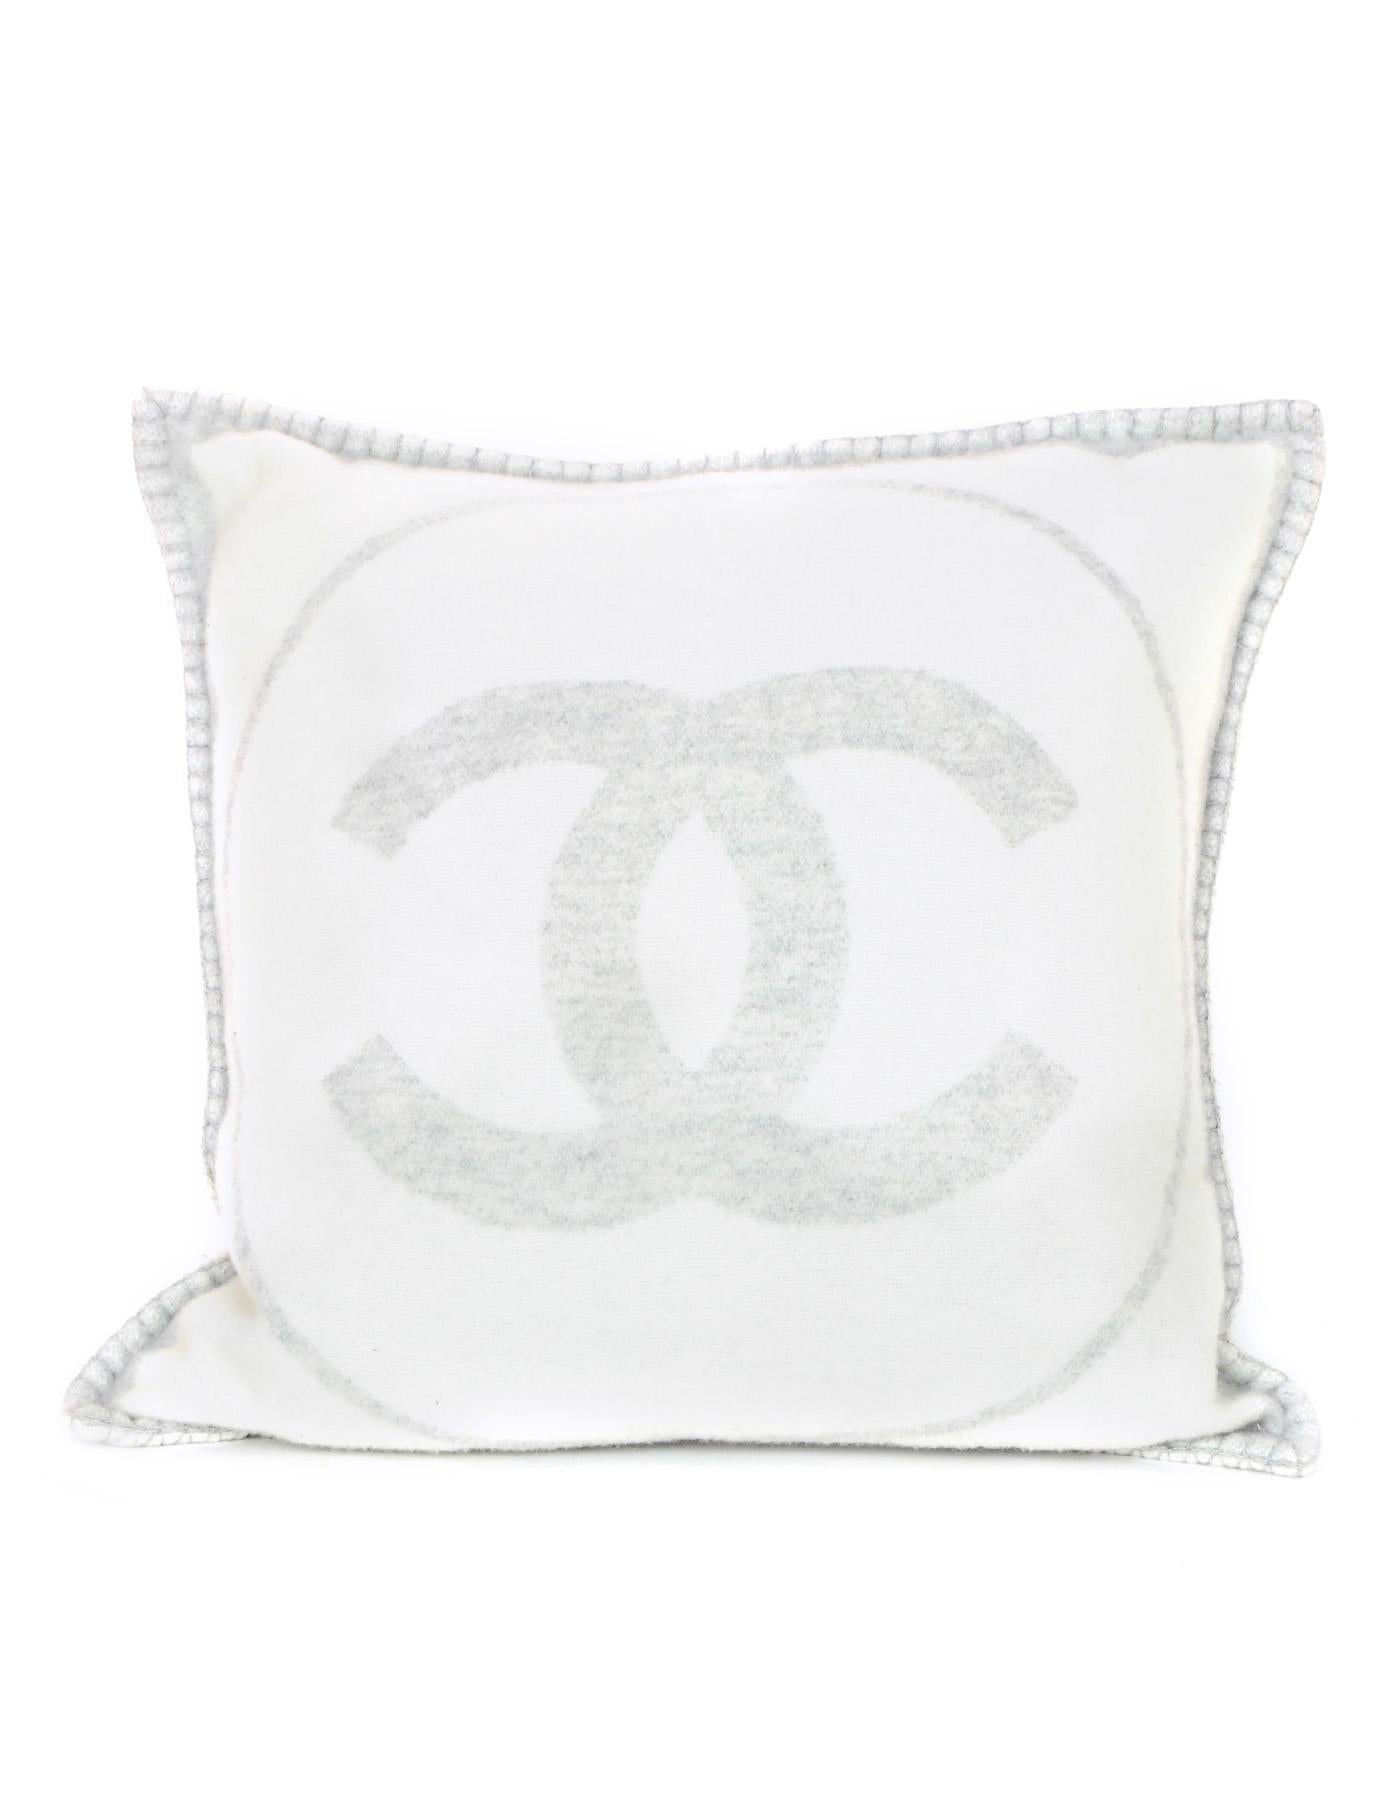 Chanel Grey/Off White Wool & Cashmere CC Square Pillow
Features CC on both sides in grey and off white

Made In: Great Britian
Color: Navy and ivory
Composition: 90% wool, 10% cashmere
Pillow Lining: 100% cotton
Pillow Filling: 100% Duck